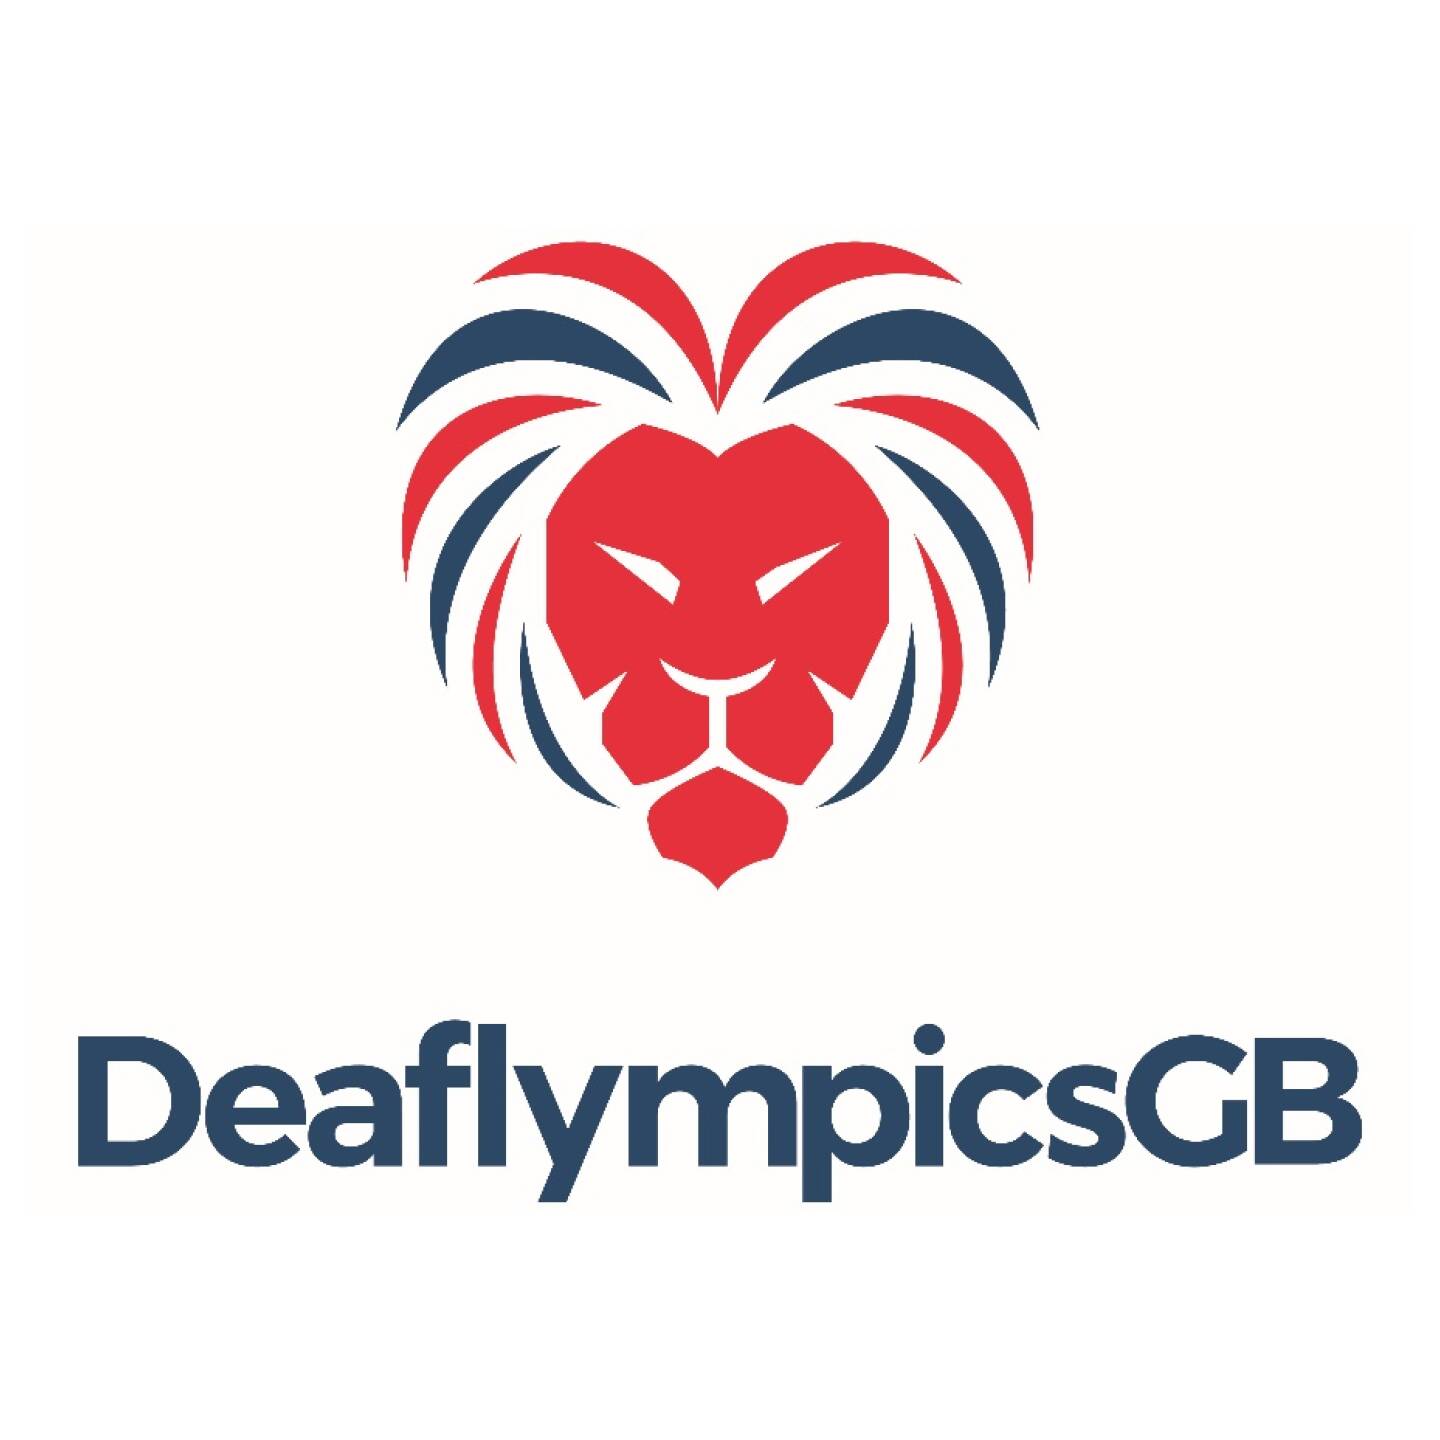 The DeaflympicsGB logo, showing a lion's head in red and blue above the words DeaflympicsGB